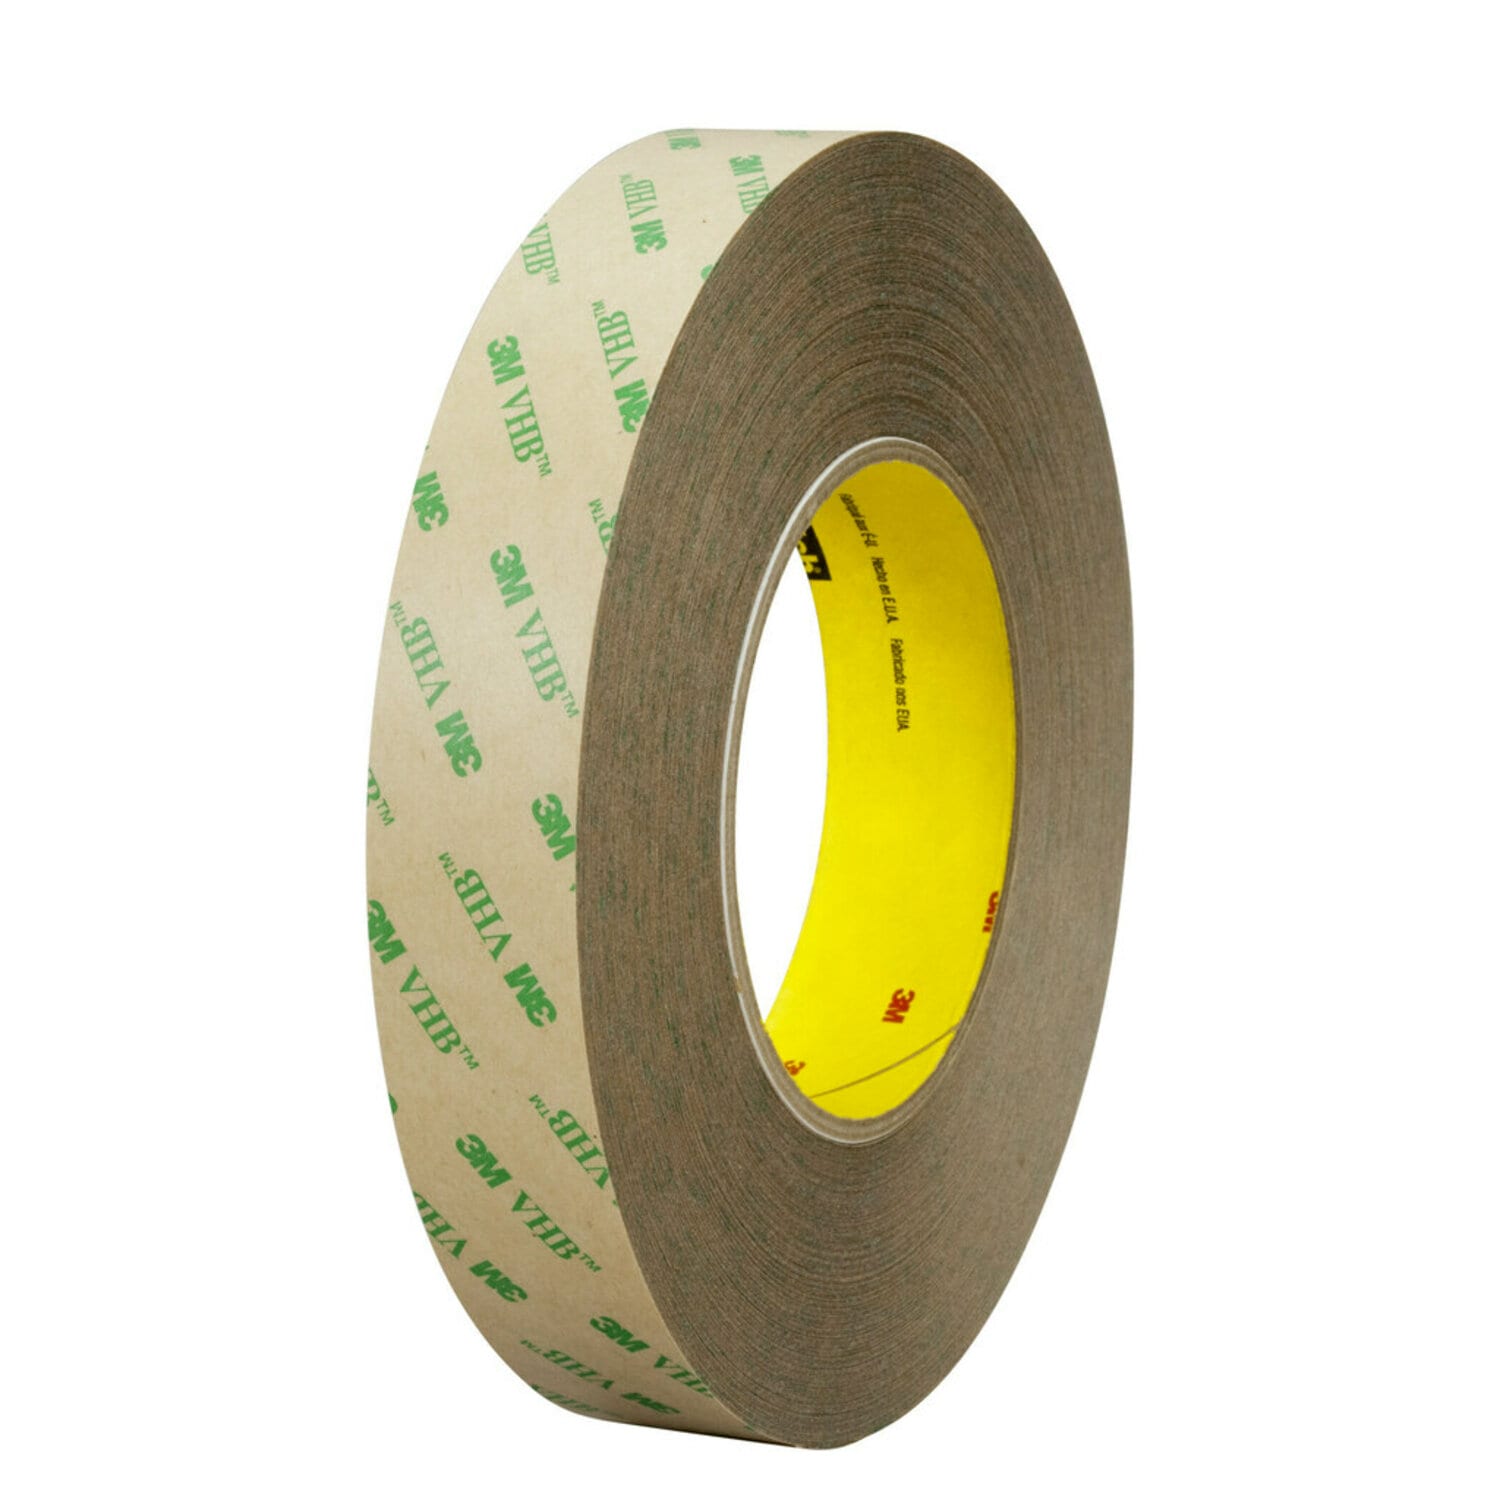 7010373806 - 3M VHB Adhesive Transfer Tape F9469PC, Clear, 24 in x 180 yd, 5 Mil,
1/Case